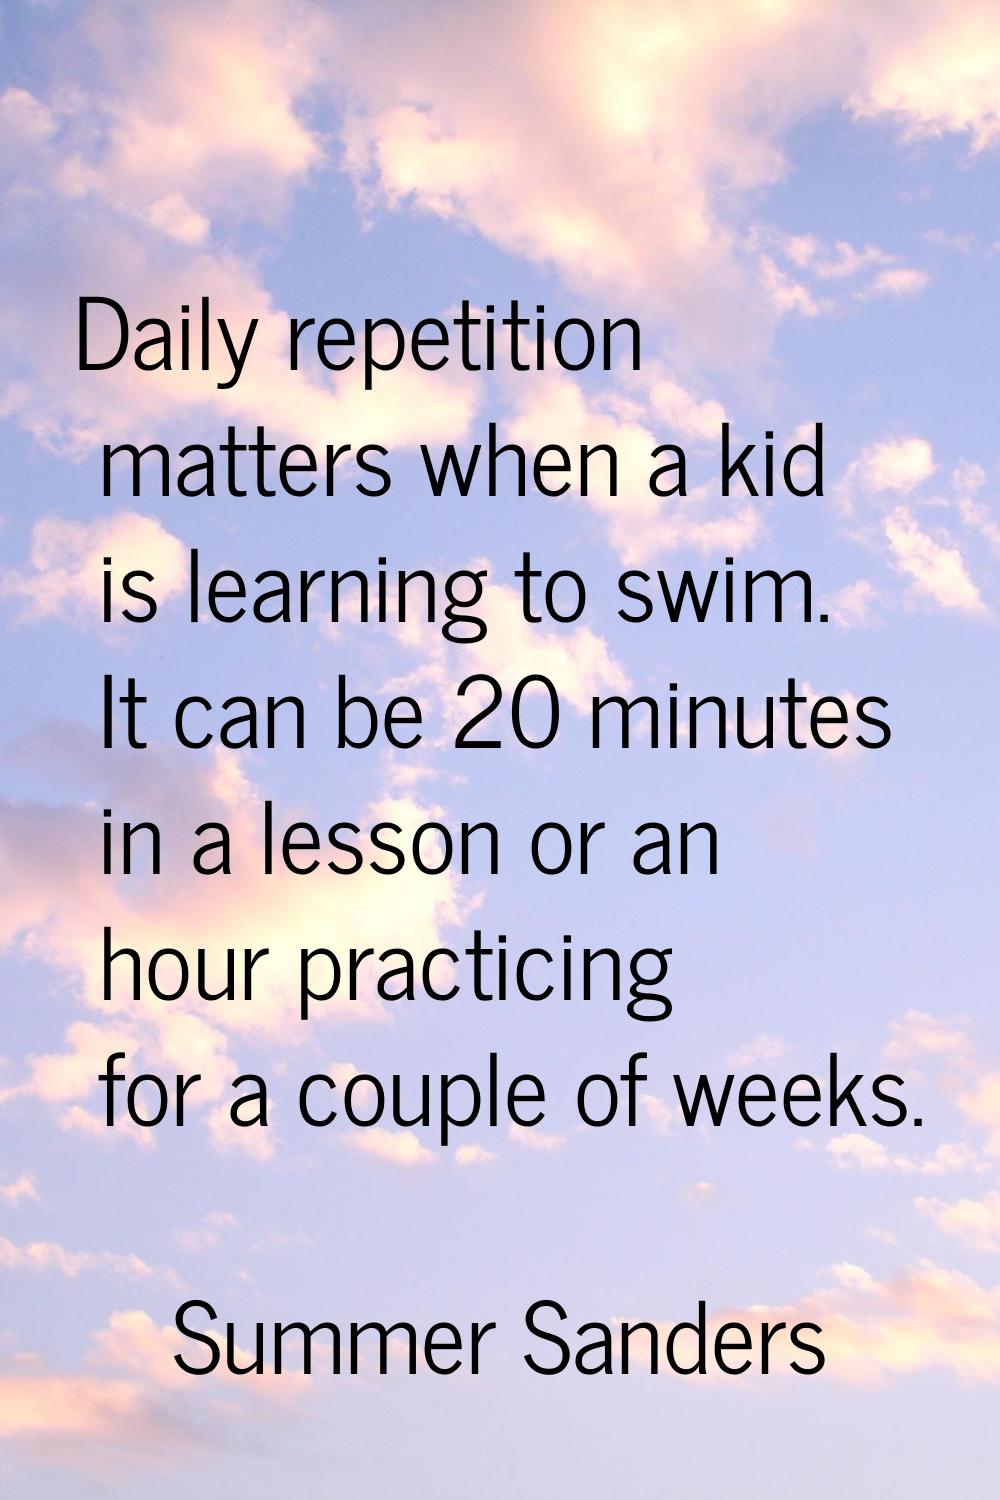 Daily repetition matters when a kid is learning to swim. It can be 20 minutes in a lesson or an hou